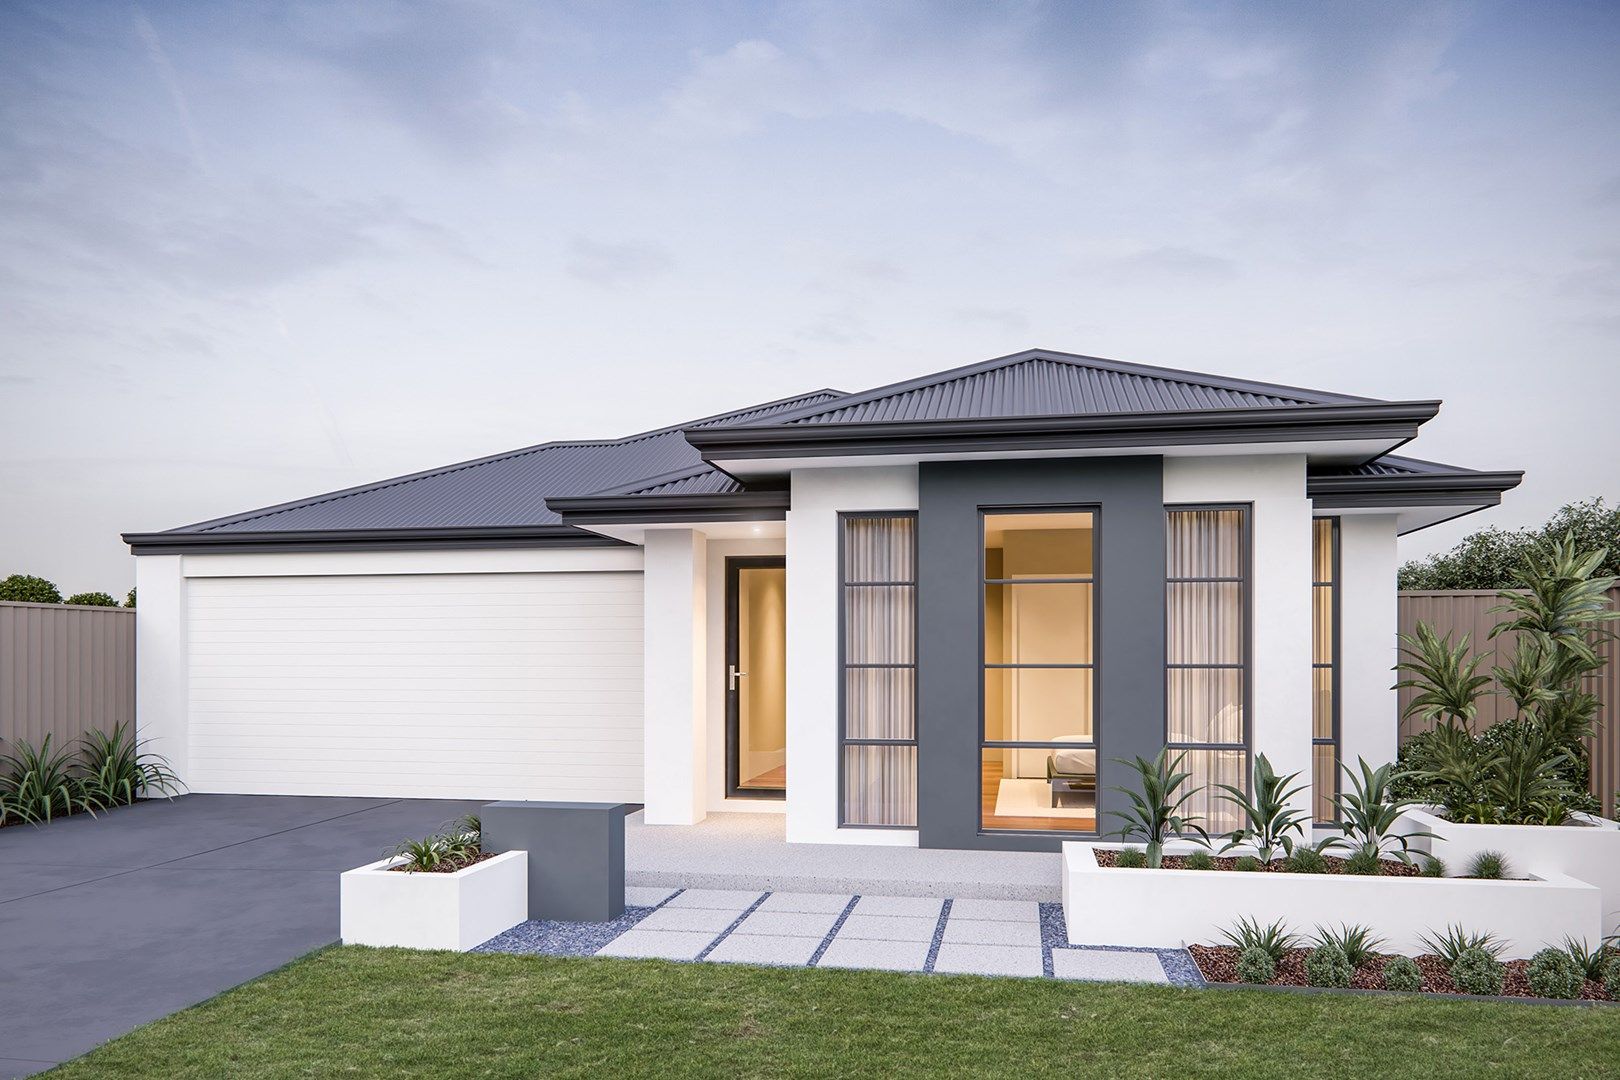 3 bedrooms New House & Land in Lot 1853 Moncrieff Parade (Celebration Homes) GOLDEN BAY WA, 6174